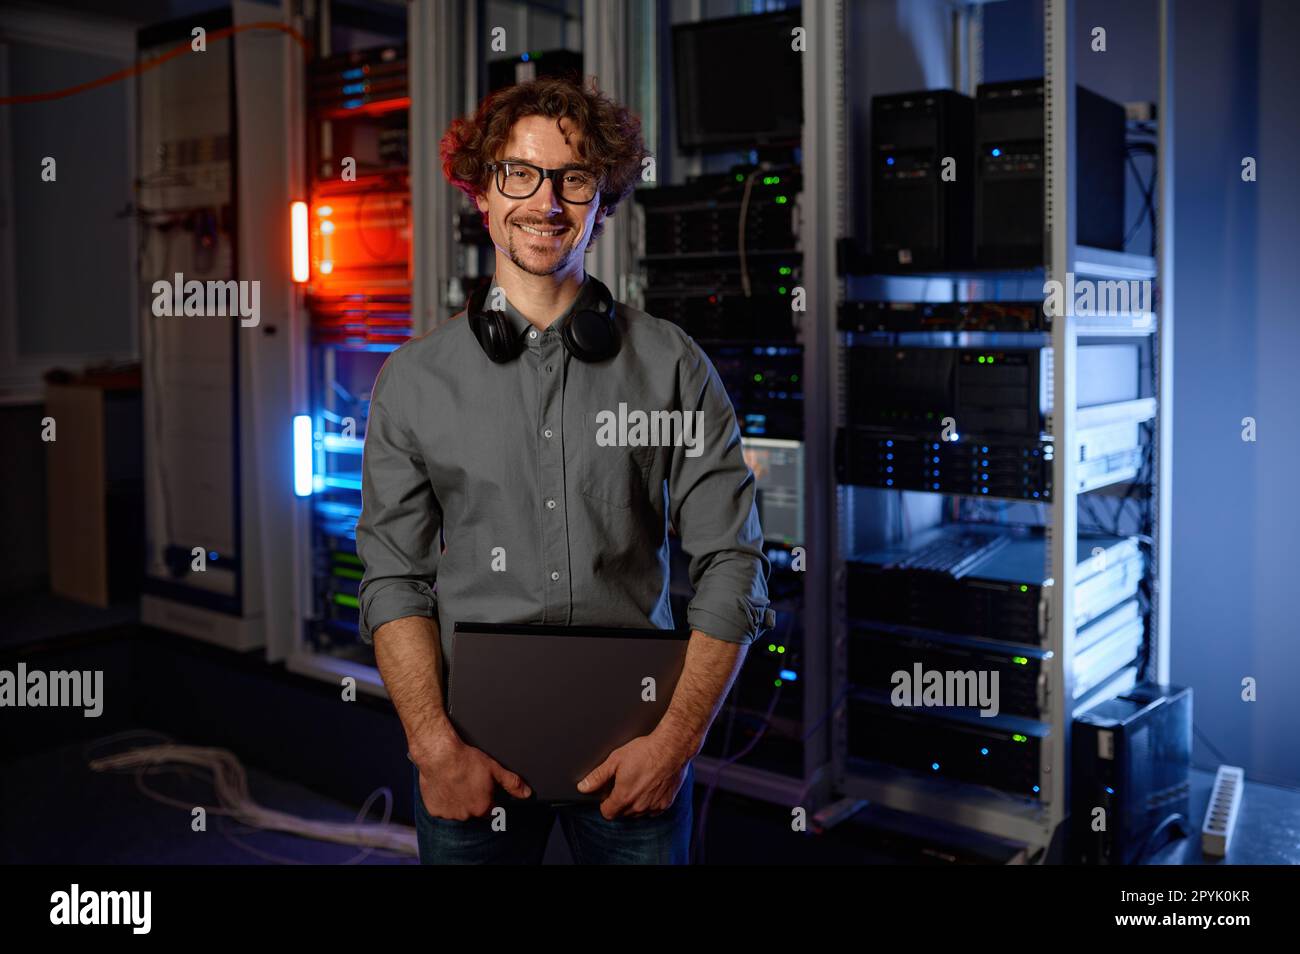 Portrait of smiling network engineer standing with laptop in server room Stock Photo